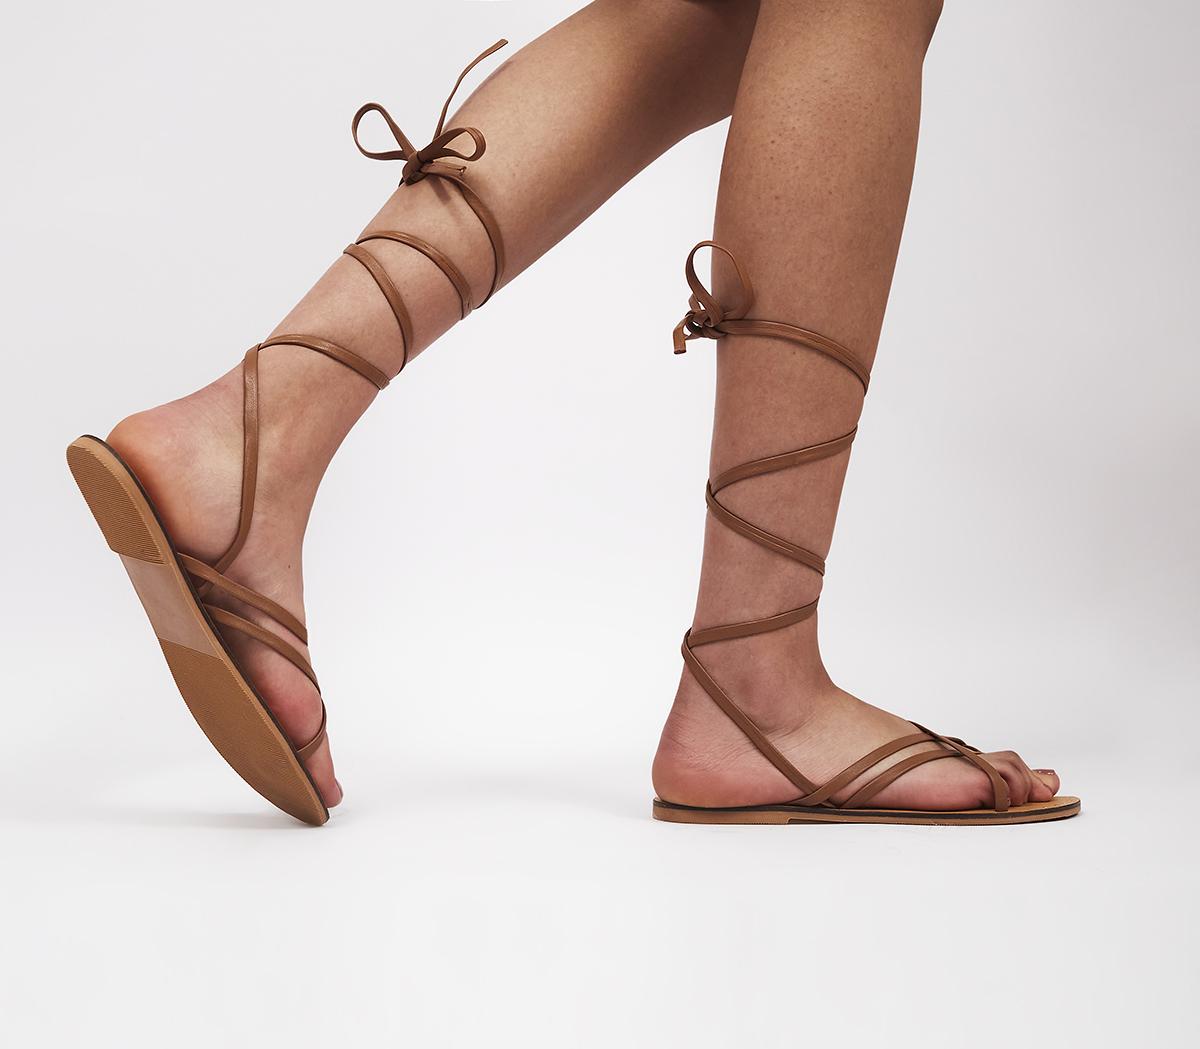 Spartacus Strappy Gladiator Sandals Tan Leather